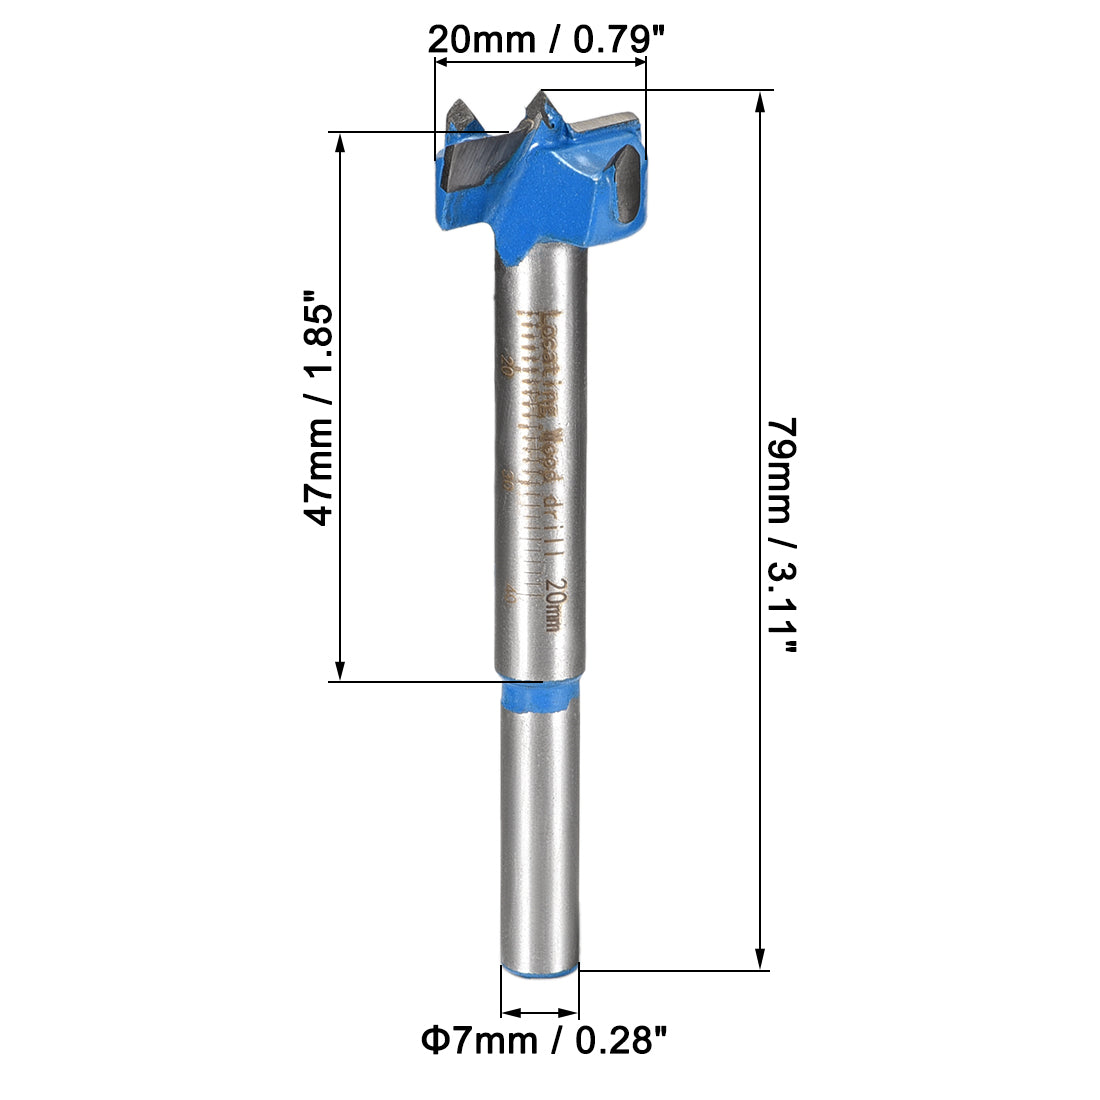 uxcell Uxcell Forstner Wood Boring Drill Bit 20mm Dia. Hole Saw Carbide Alloy Steel Tip Round Shank Cutting for Hinge Plywood Wood Tool Blue 1Set